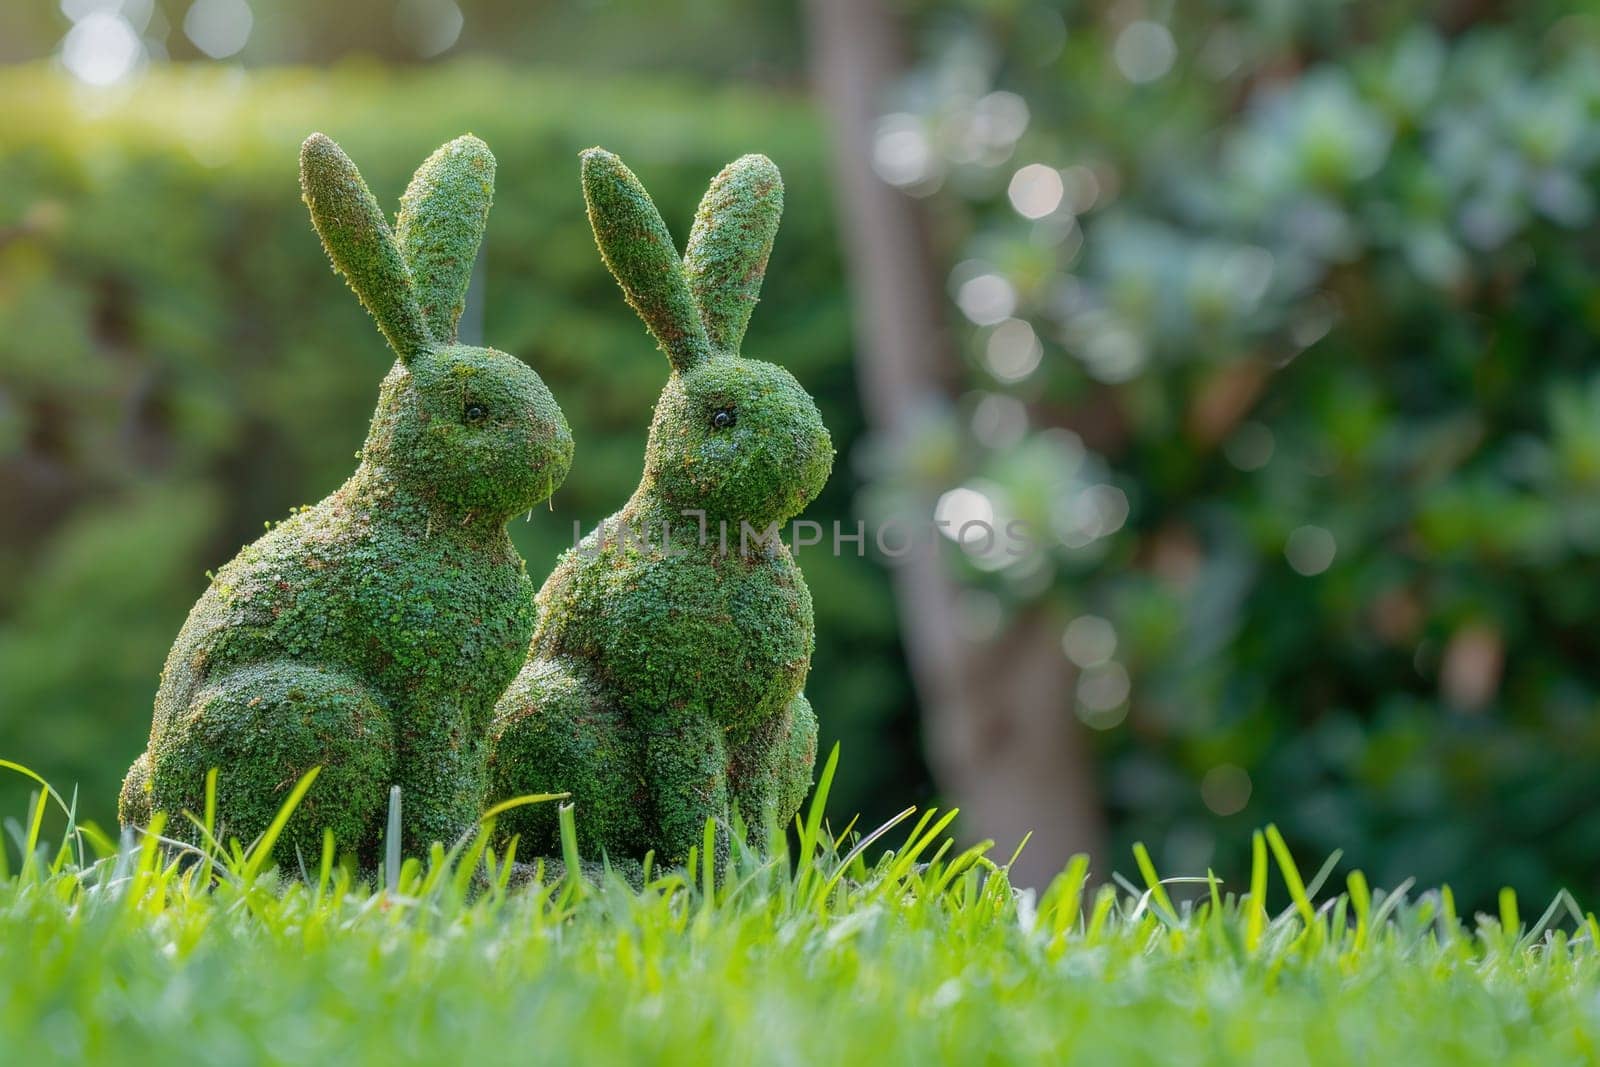 Two rabbits enjoying a tranquil moment in a beautiful green meadow with majestic trees in the background